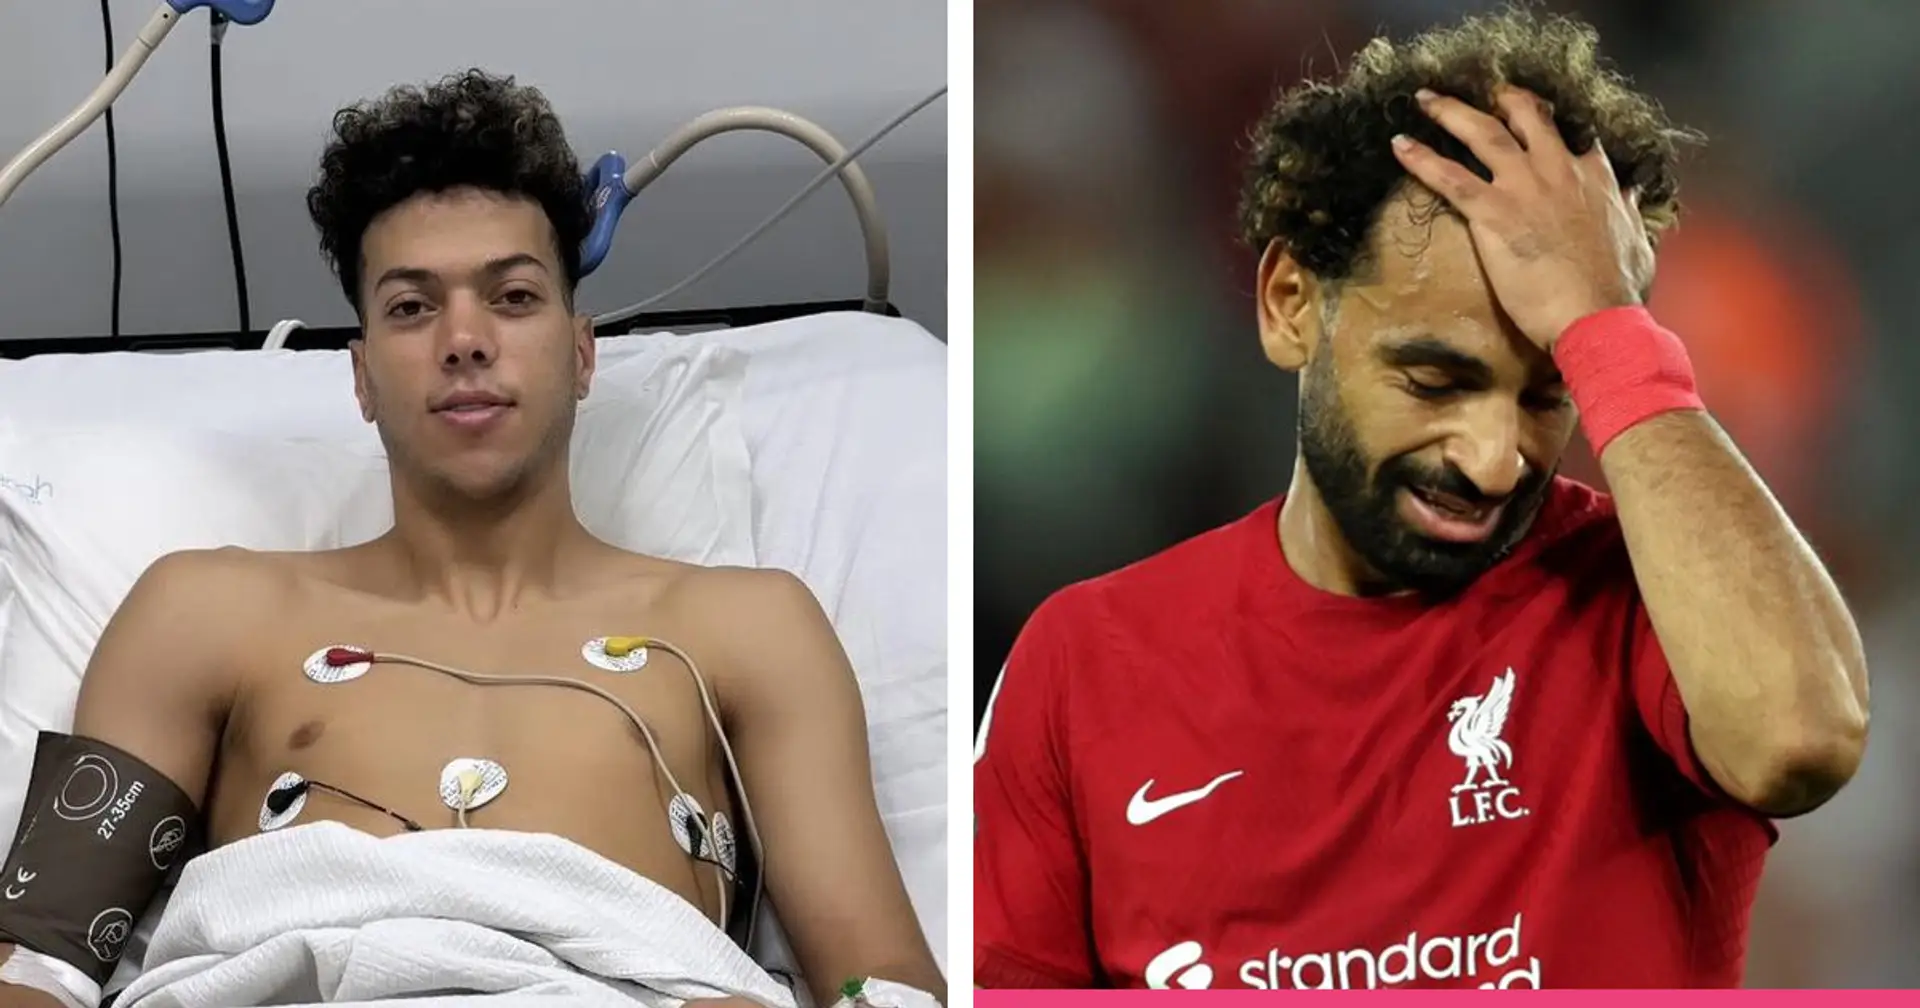 Salah's teammate gets himself in the hospital by getting the dumbest injury ever